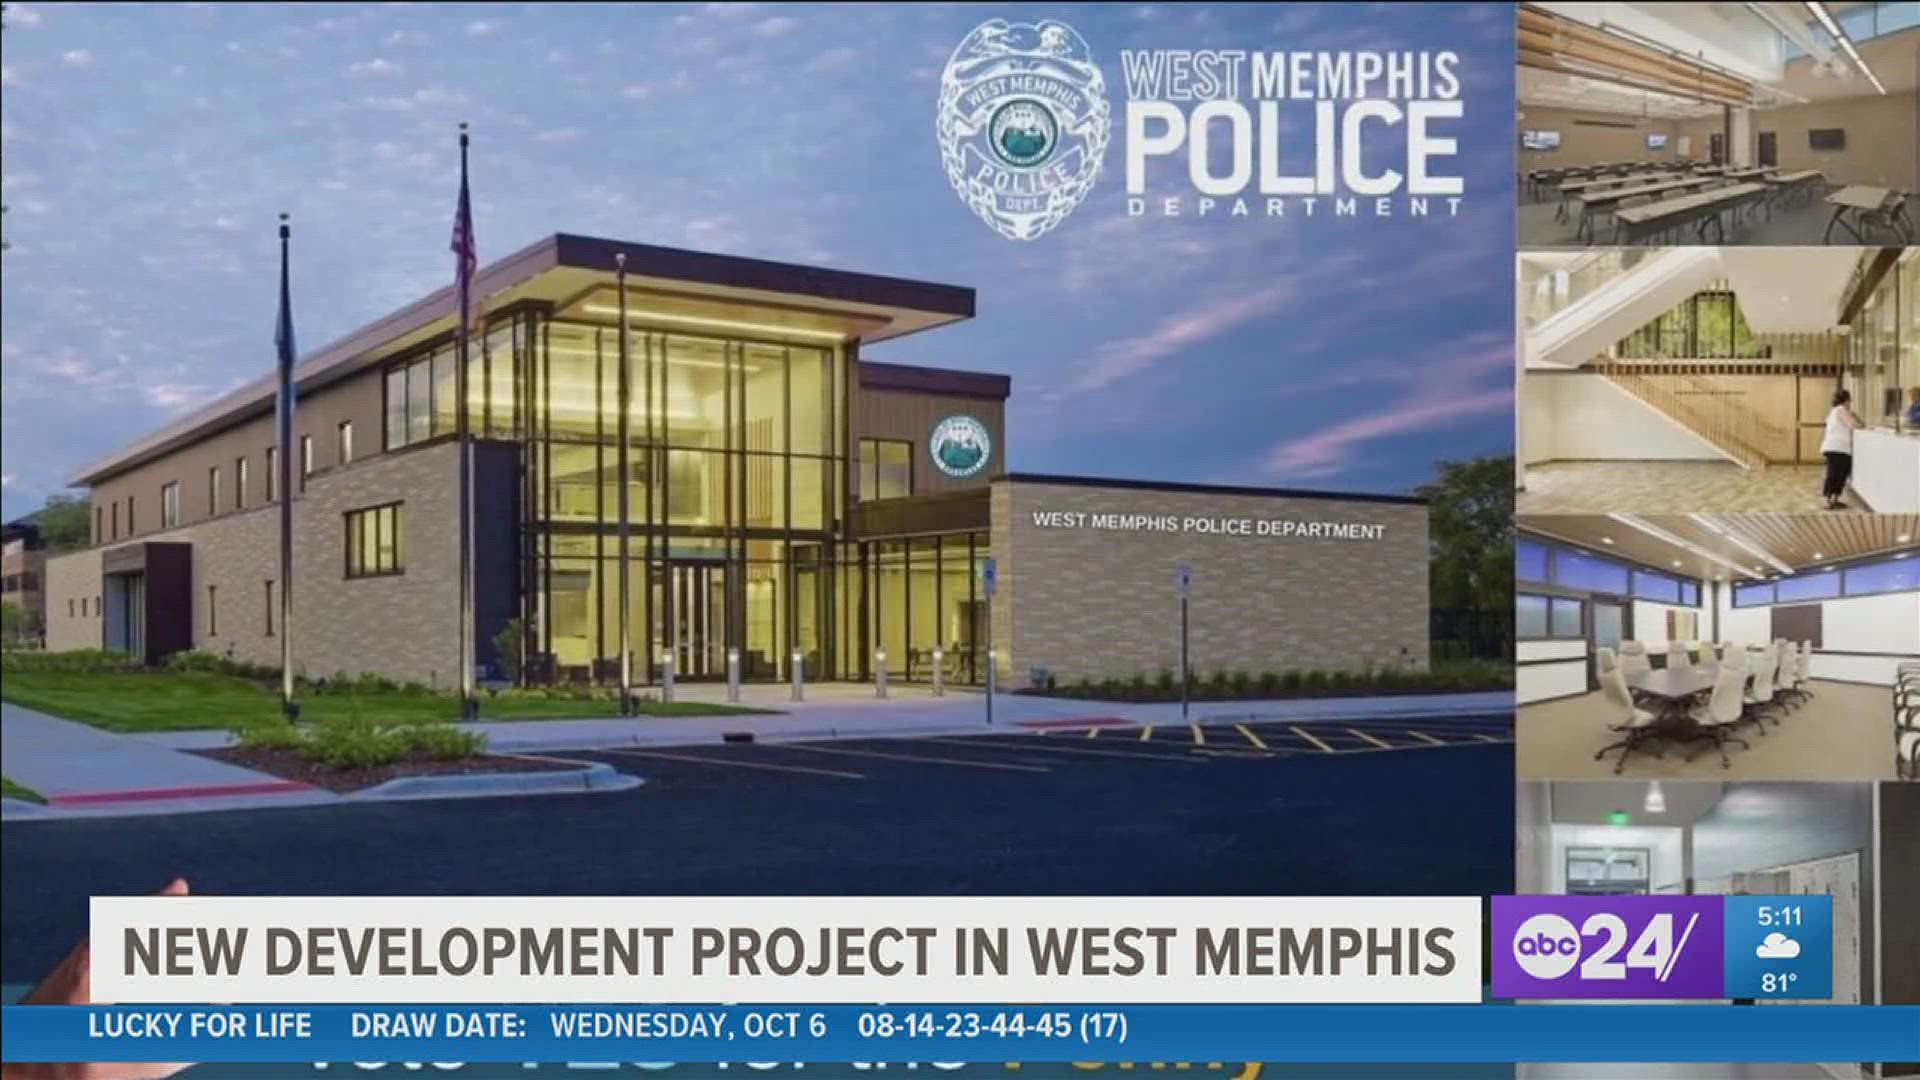 While some wanted the project on the ballot for the Dec. 14th special election, West Memphis City Council members chose to table it for more discussion.